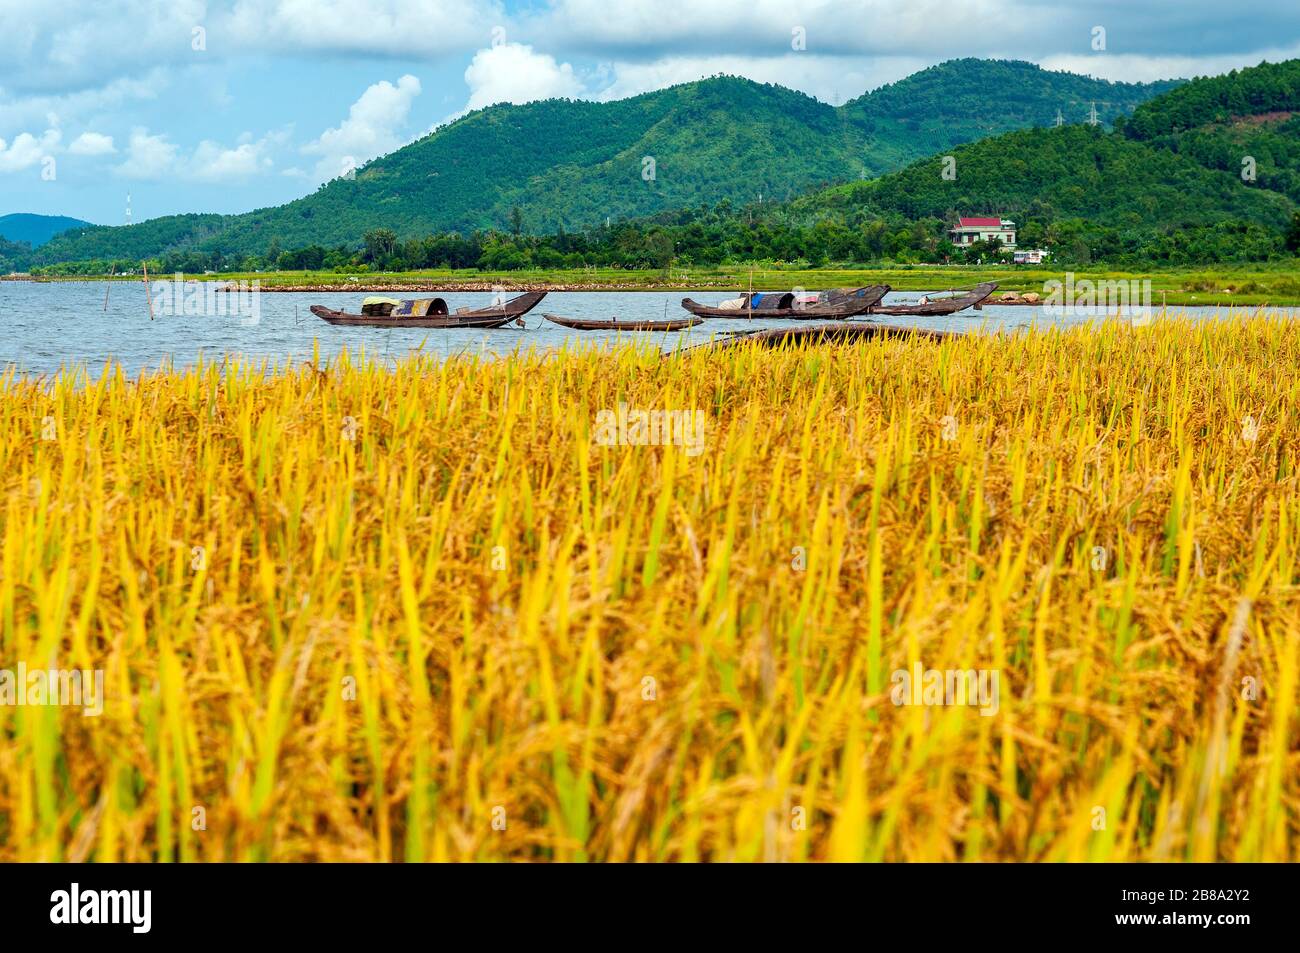 Yellow rice field ready for harvest, shrimp fishing boats and green hills between Hue and Hoi An in Central Vietnam. Unsharp rice field, sharp boats. Stock Photo